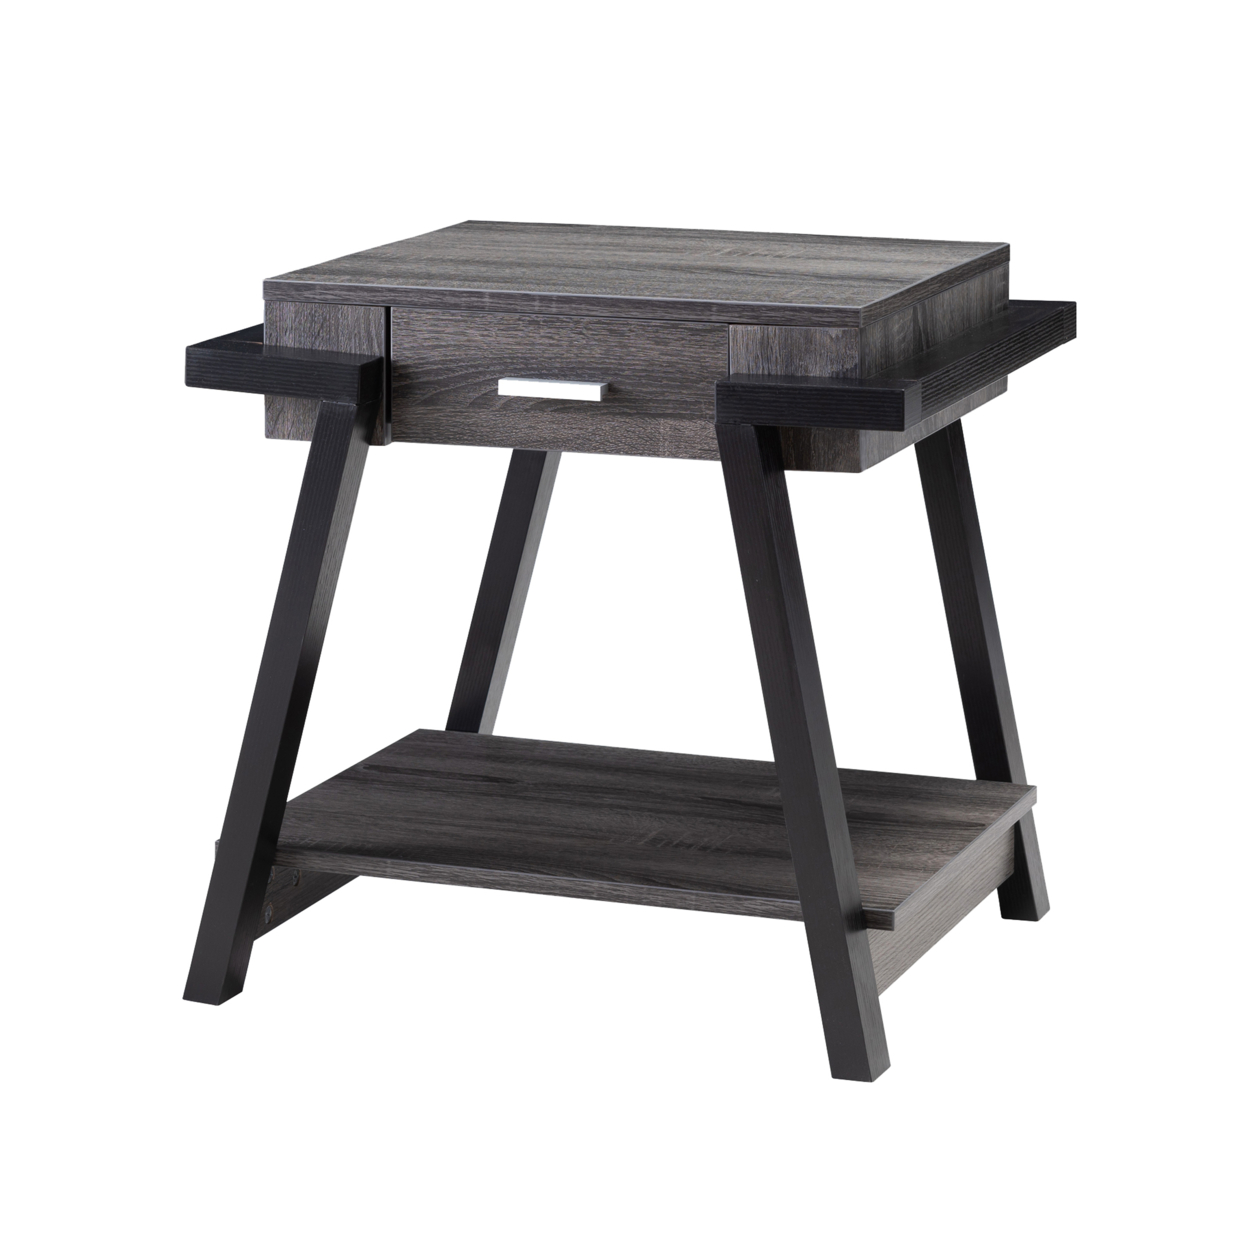 Wooden End Table With Angled Leg Support And 1 Drawer, Black And Gray- Saltoro Sherpi